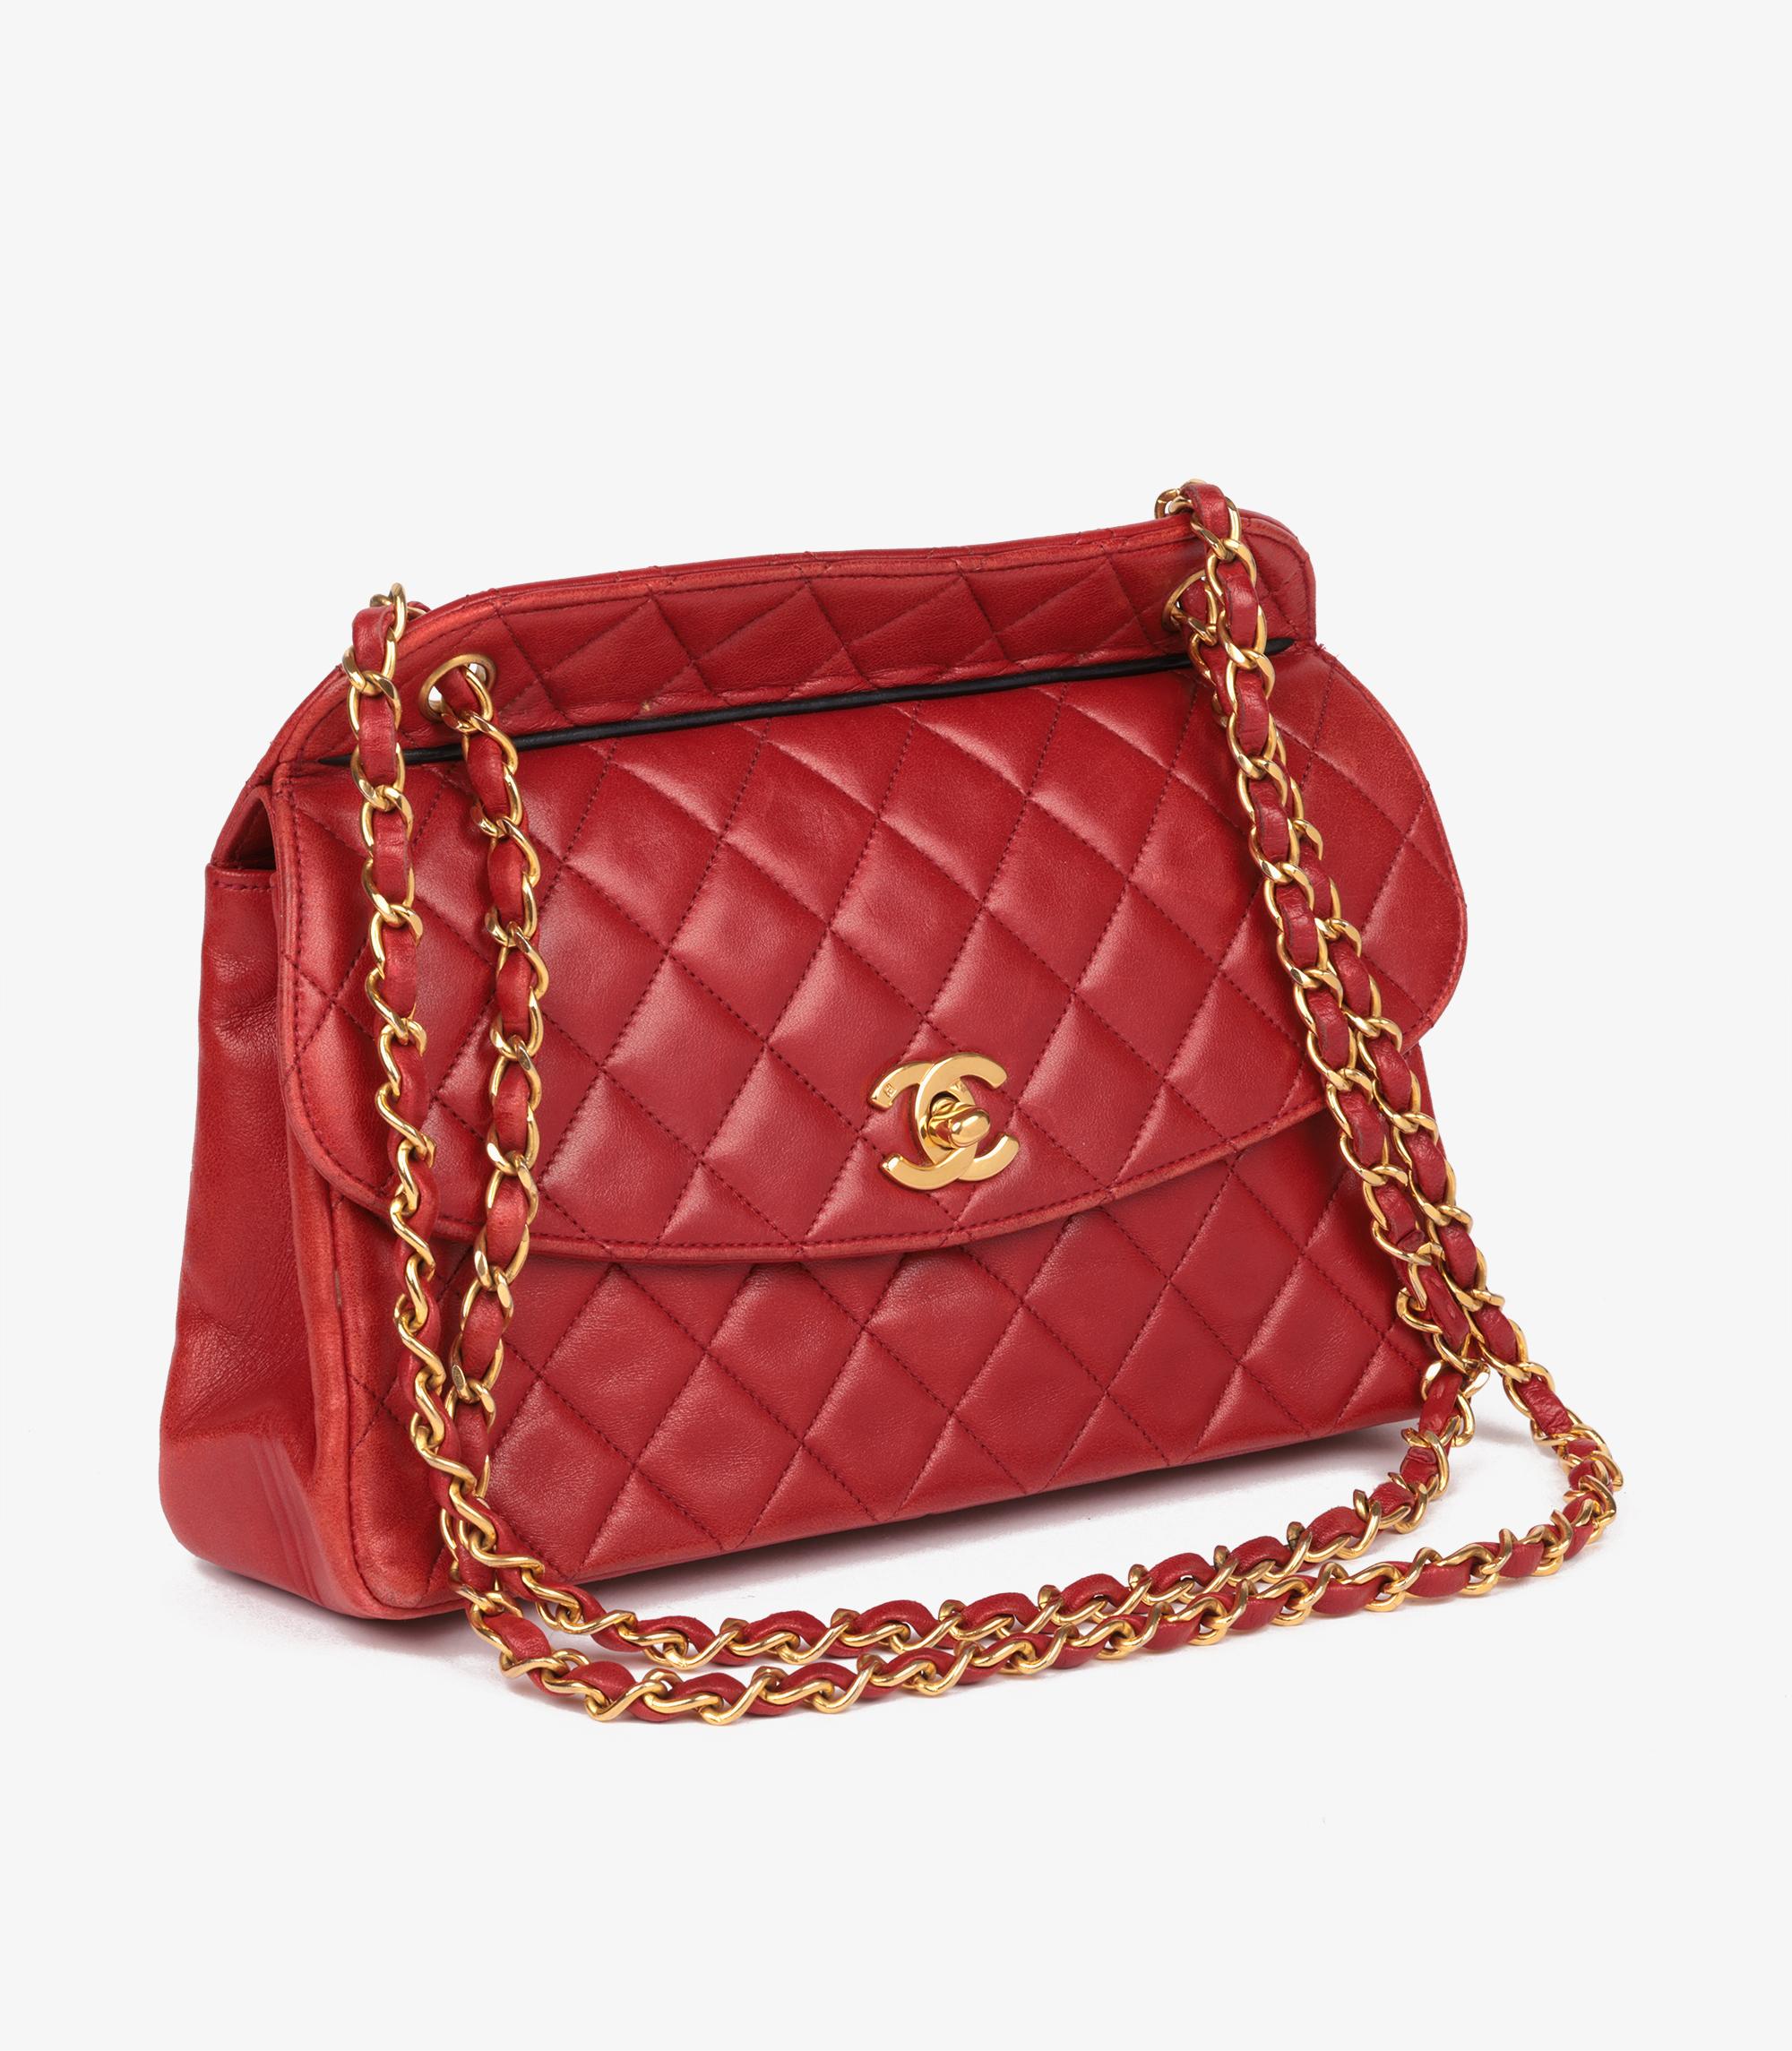 Chanel Red Quilted Lambskin Vintage Medium Classic Single Flap Bag With Pouch

Brand- Chanel
Model- Medium Classic Single Flap Bag
Product Type- Shoulder
Serial Number- 1505971
Age- Circa 1989
Accompanied By- Chanel Dust Bag, Authenticity Card,